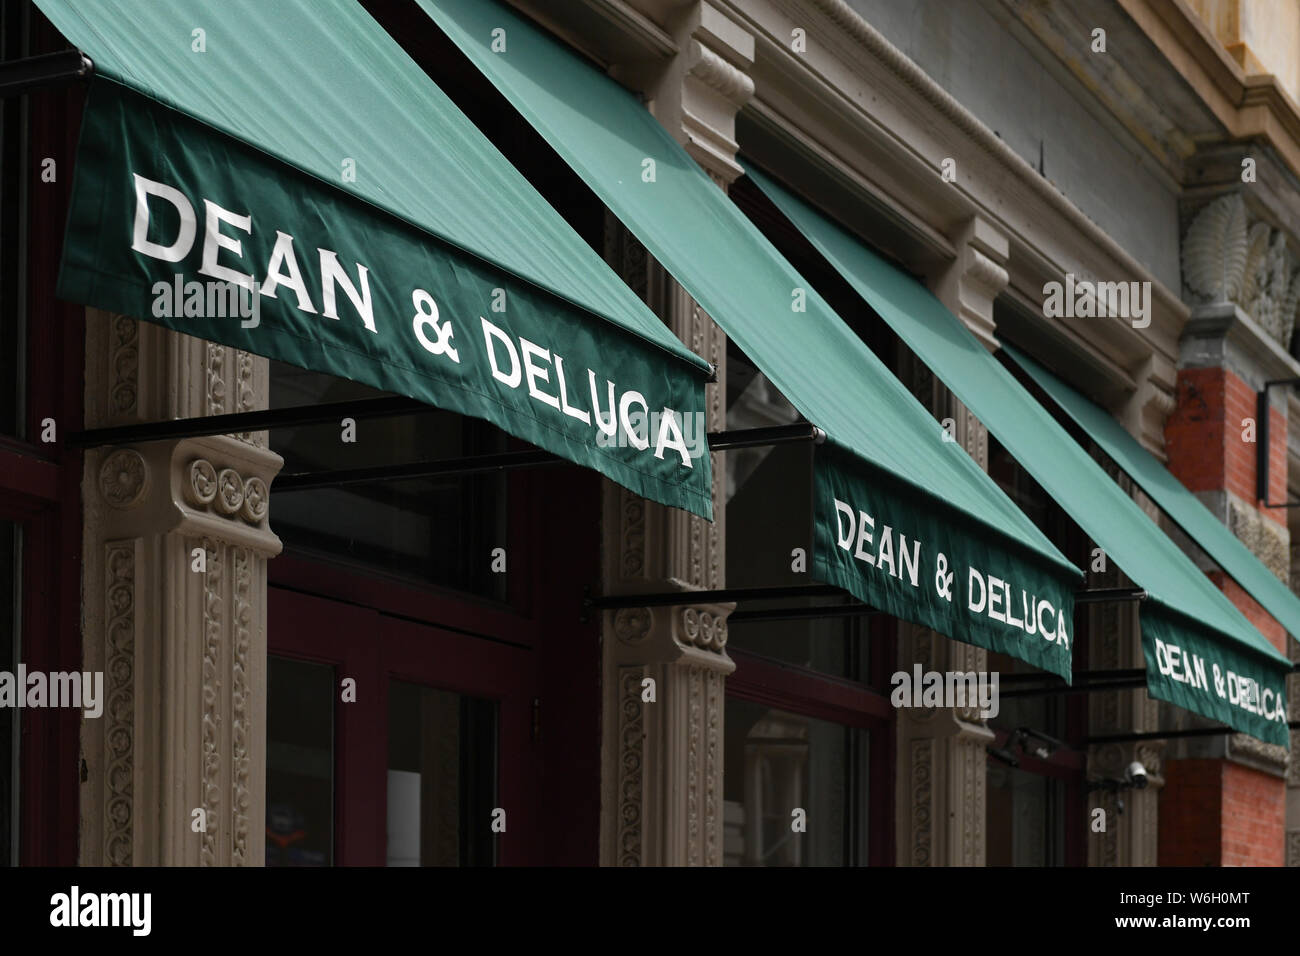 Pedestrians pass in front of a Dean & DeLuca store in the Soho neighborhood of New York. Stock Photo